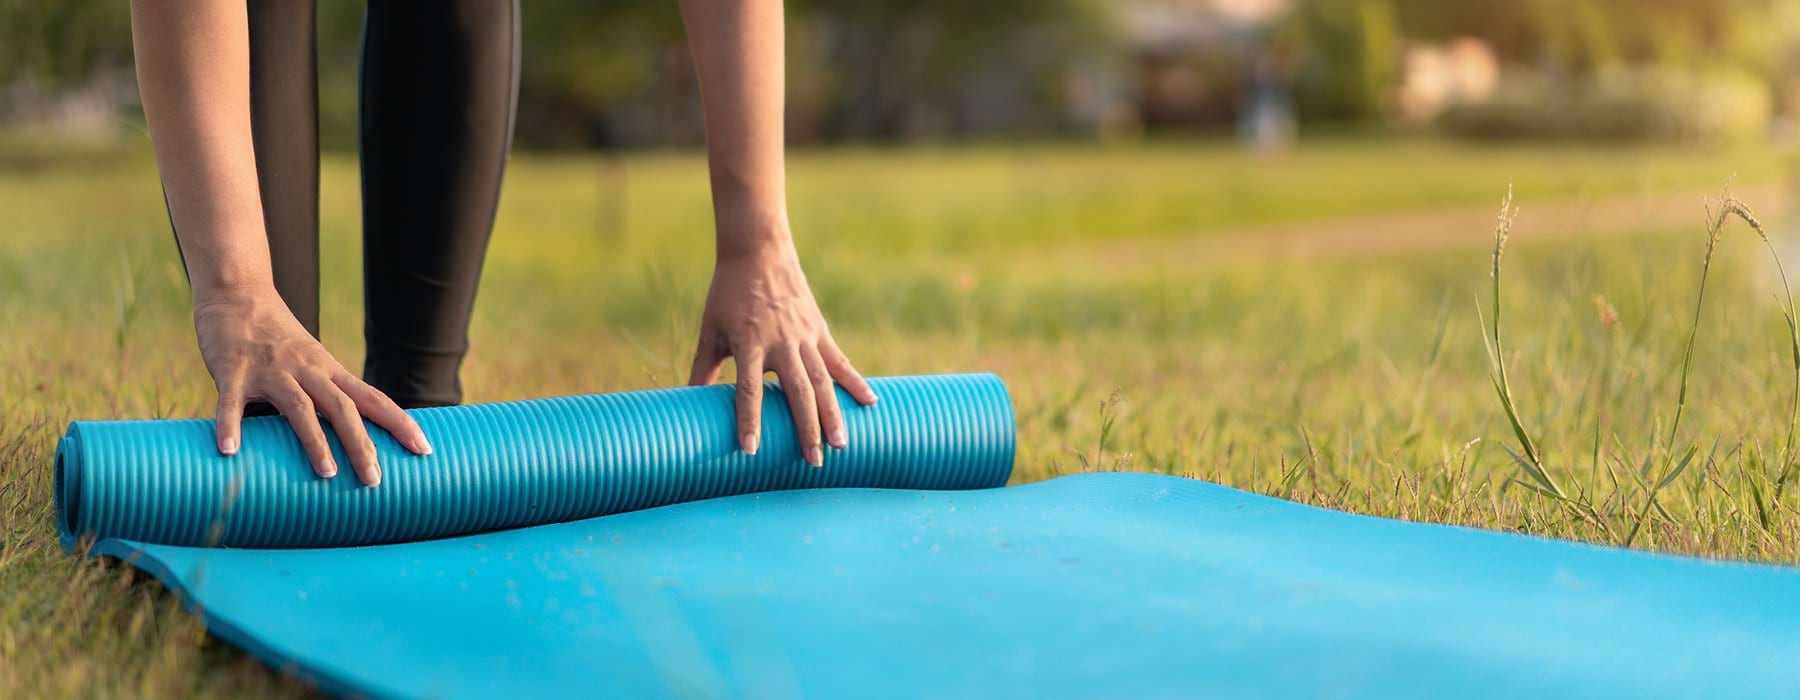 resident rolls up her yoga mat on lawn